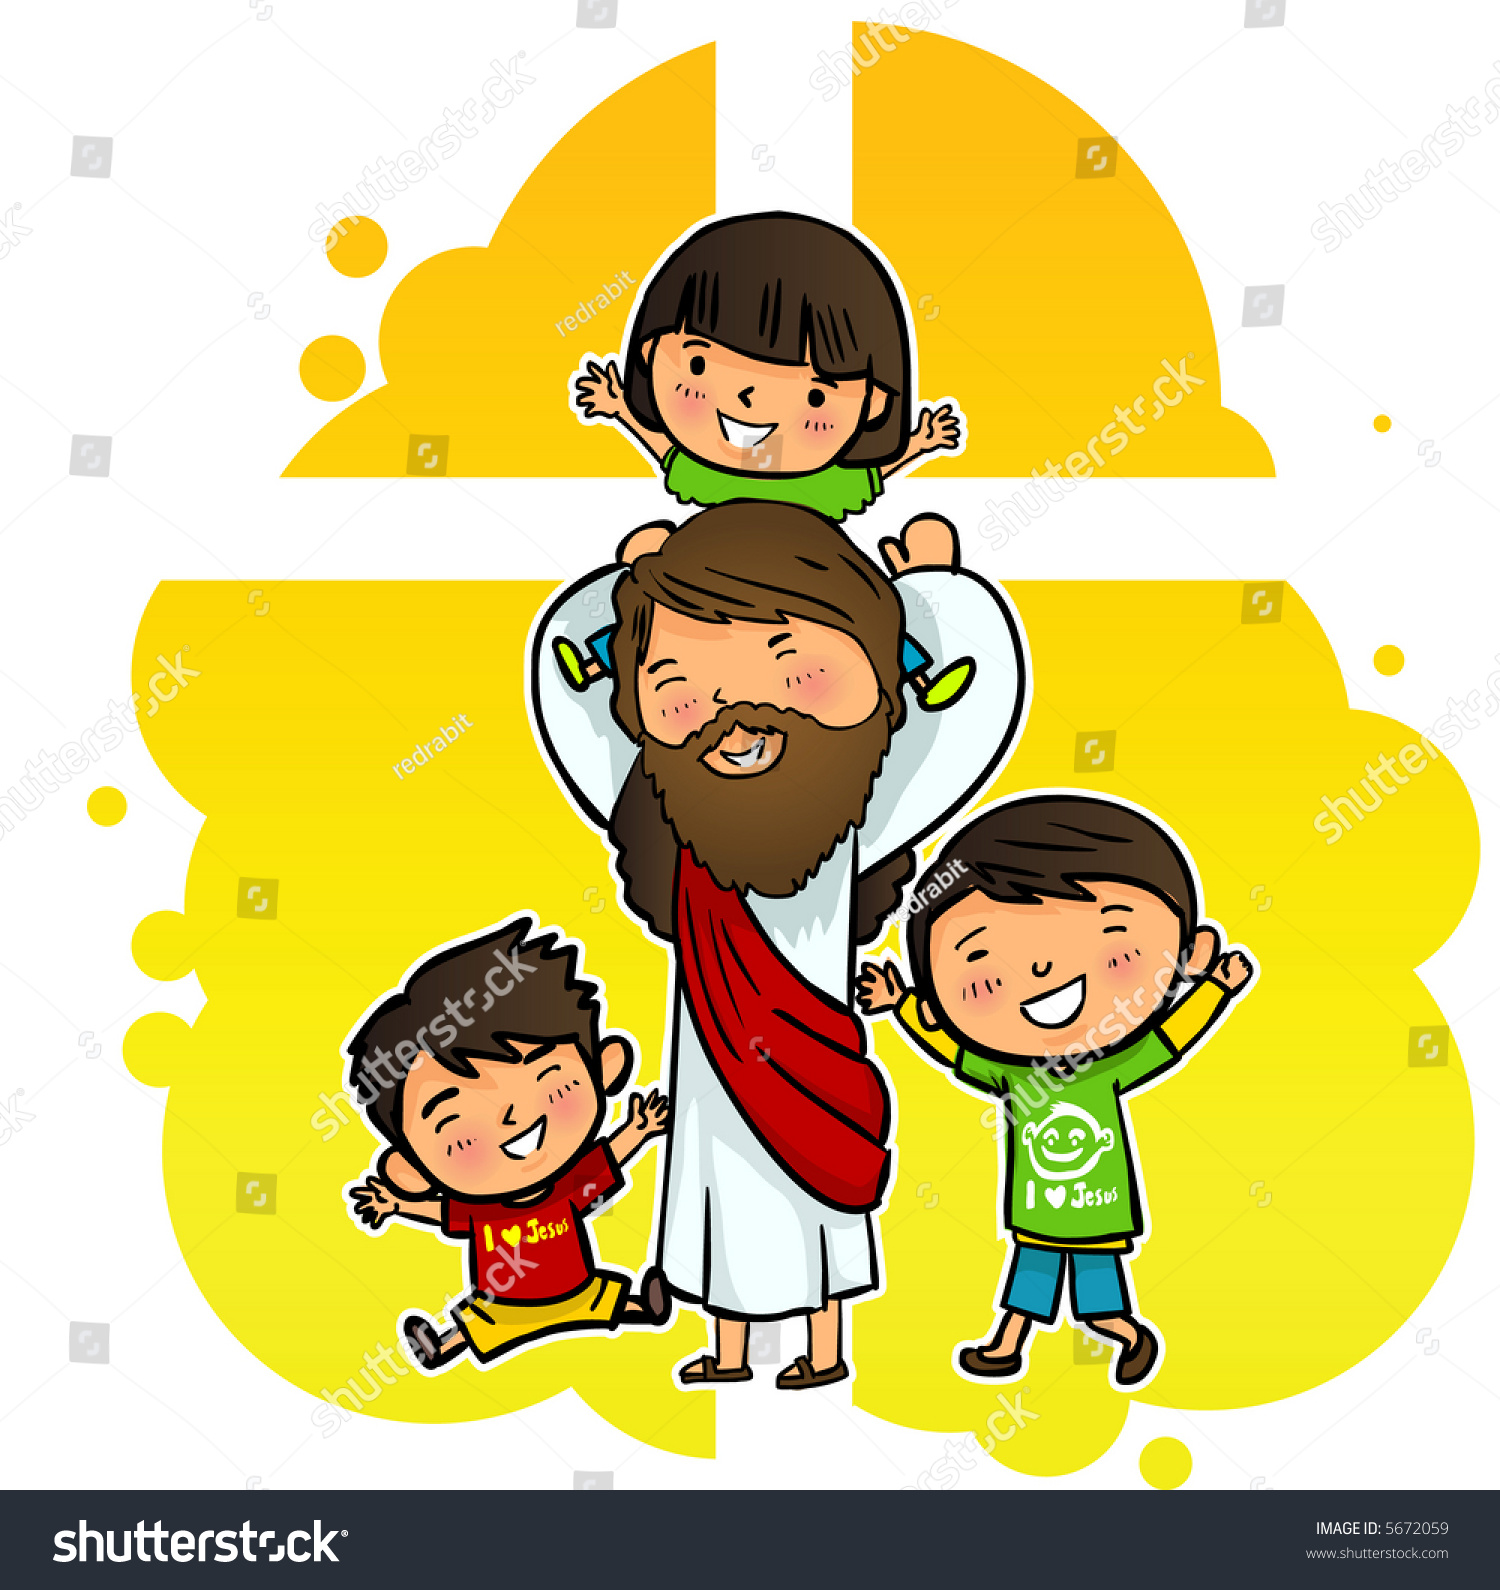 clipart of young jesus - photo #16